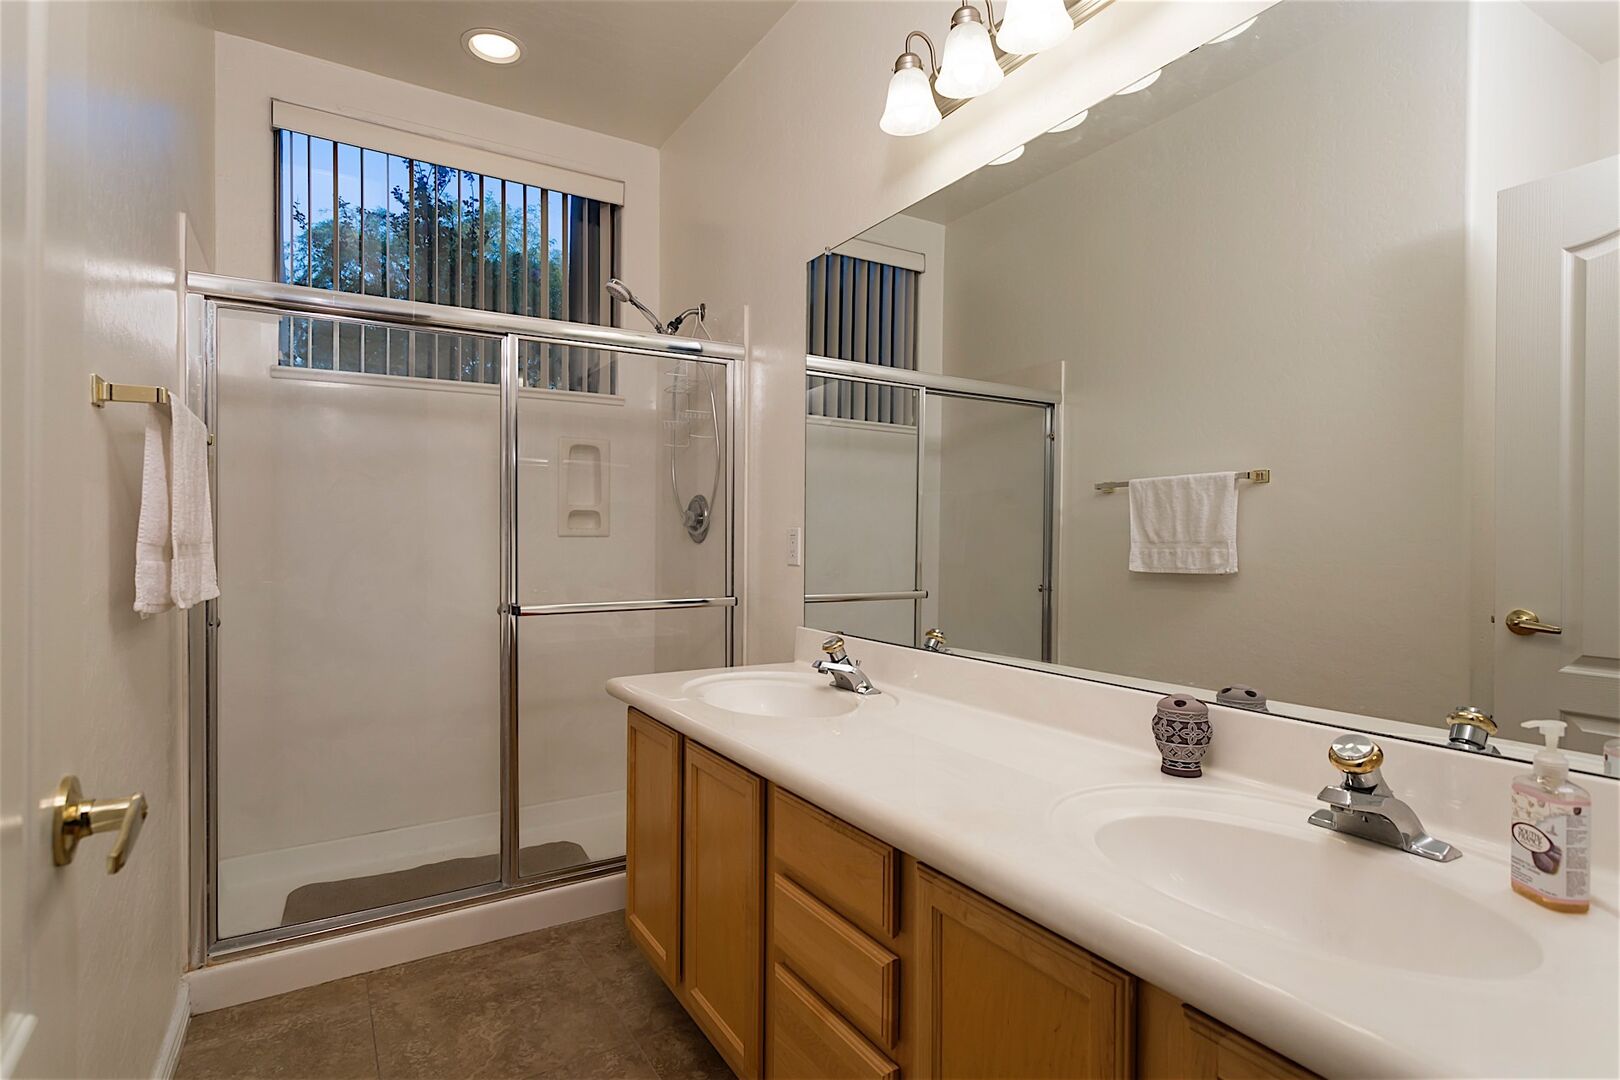 Large bathroom with double sink vanity ~ plenty of space for everyone